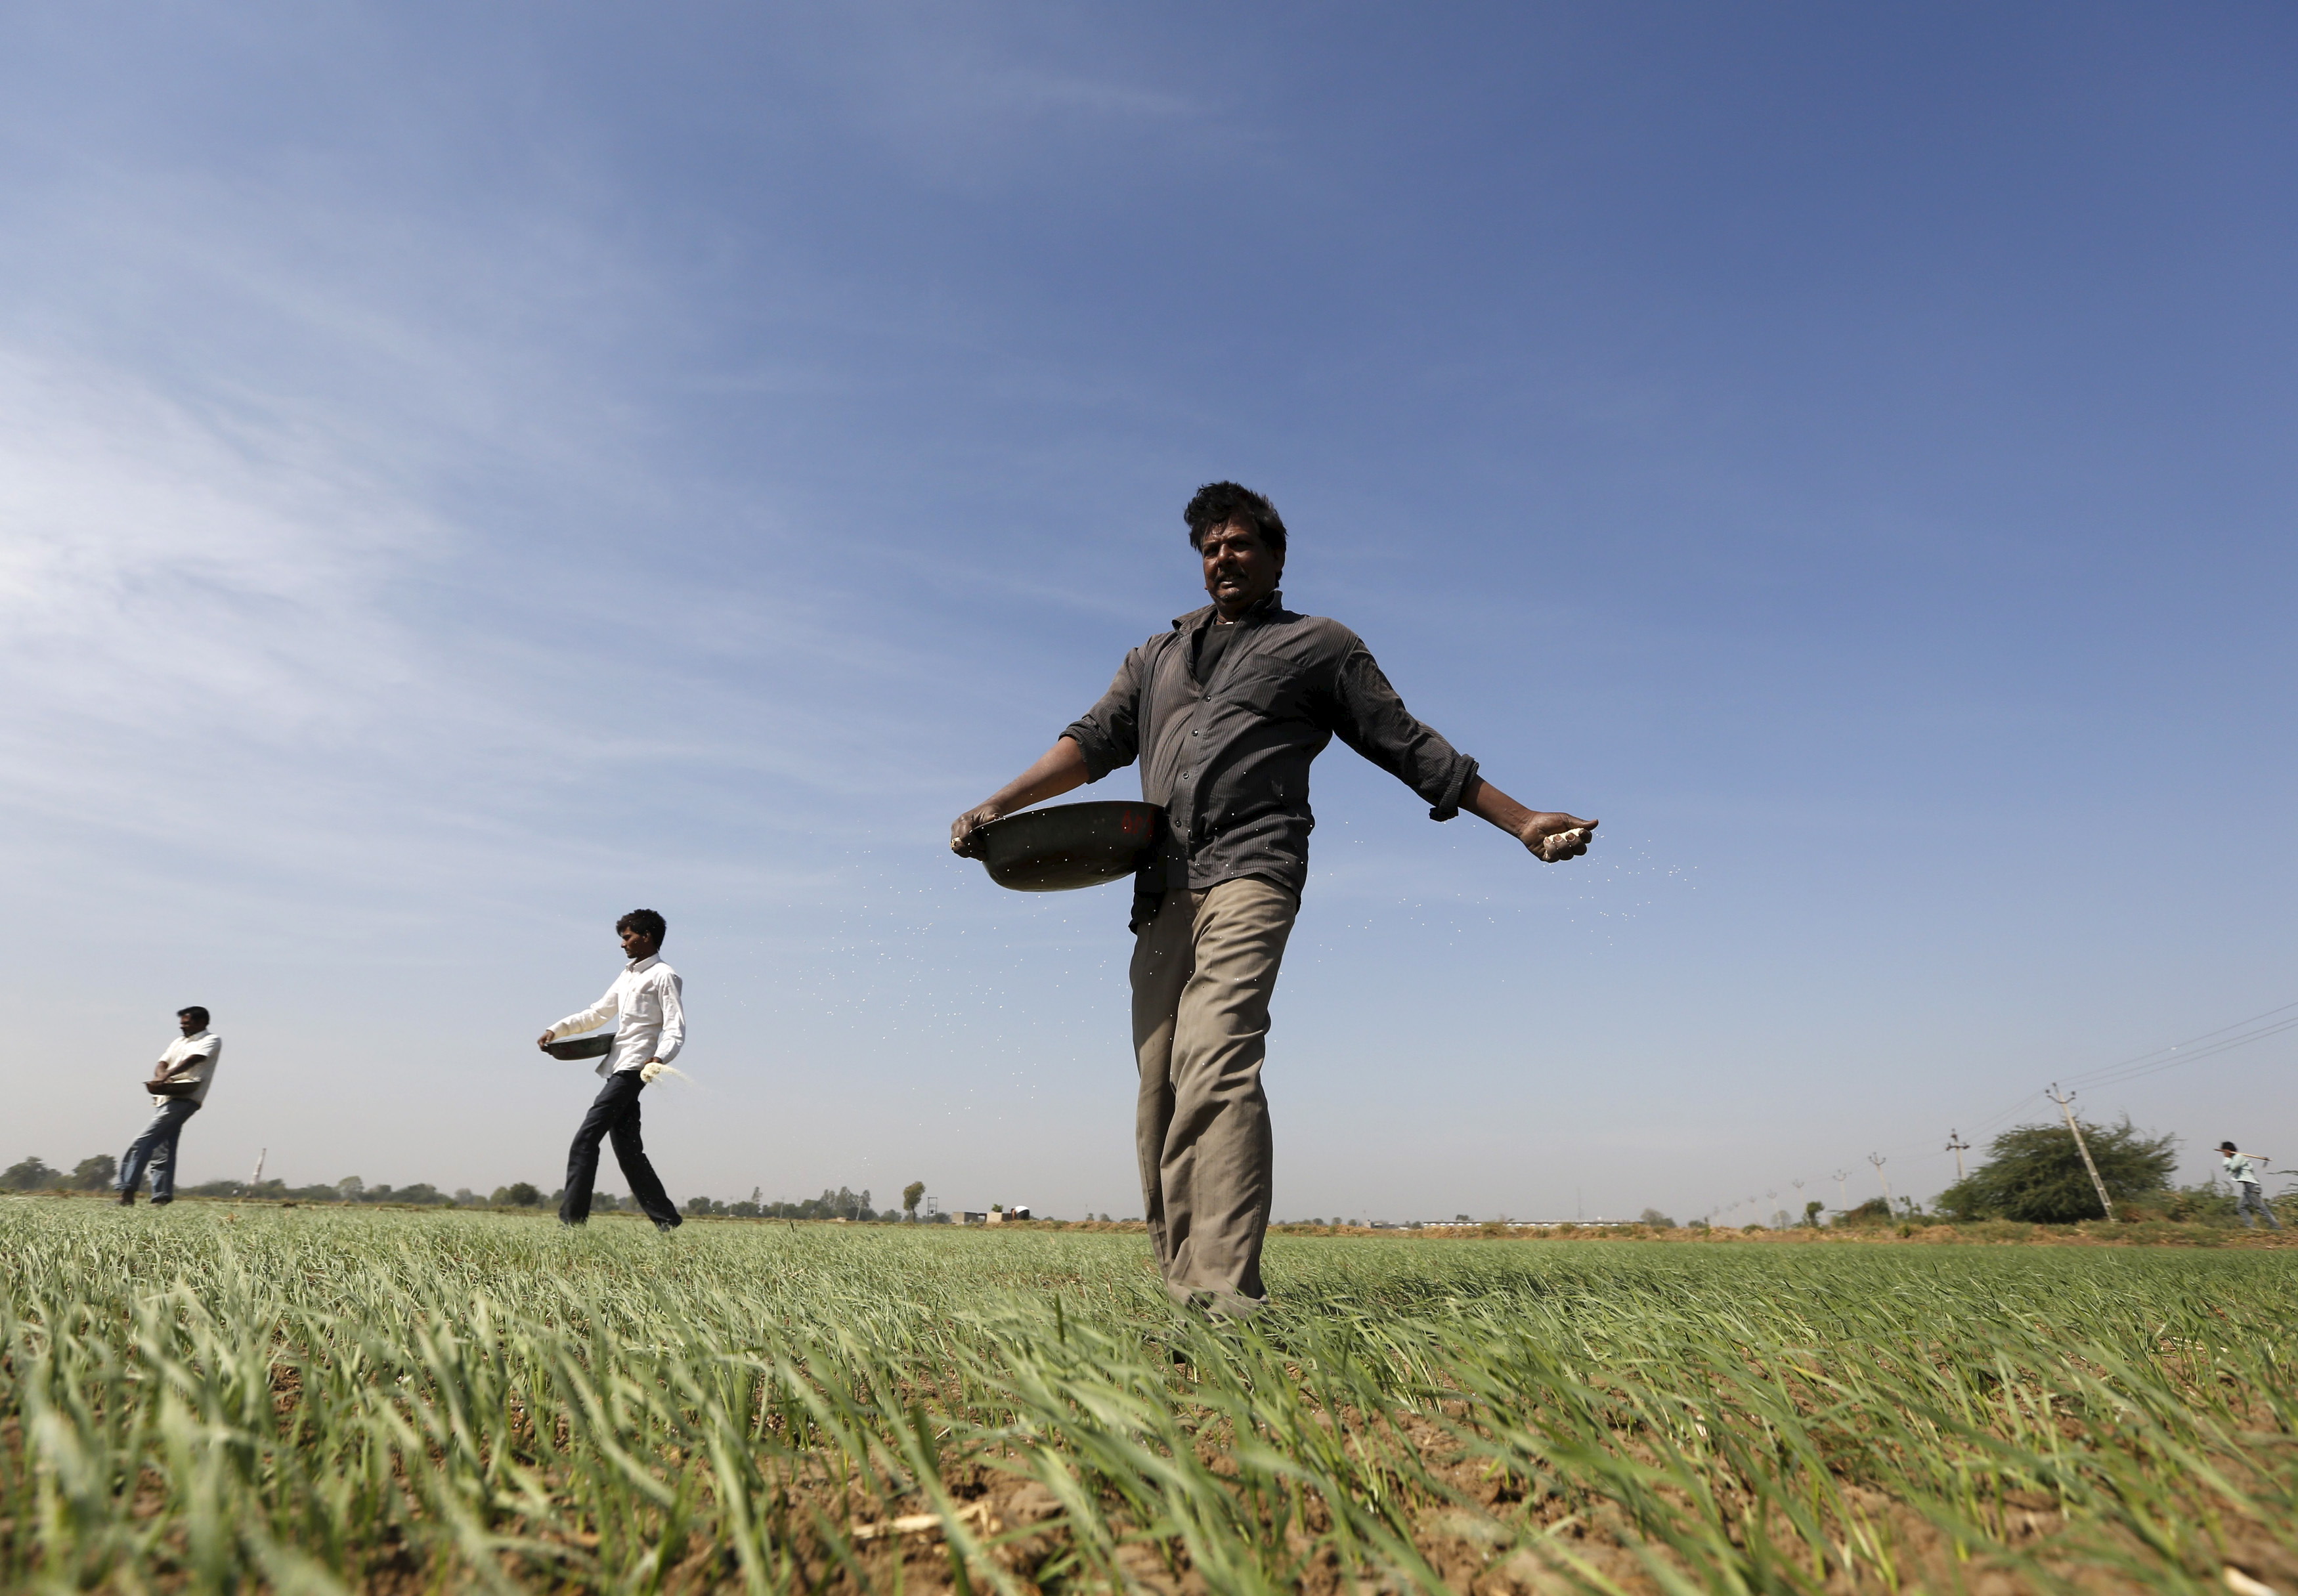 Farmers sprinkle fertilizer on a wheat field on the outskirts of Ahmedabad, India, on Dec. 15, 2015 (Amit Dave—Reuters)